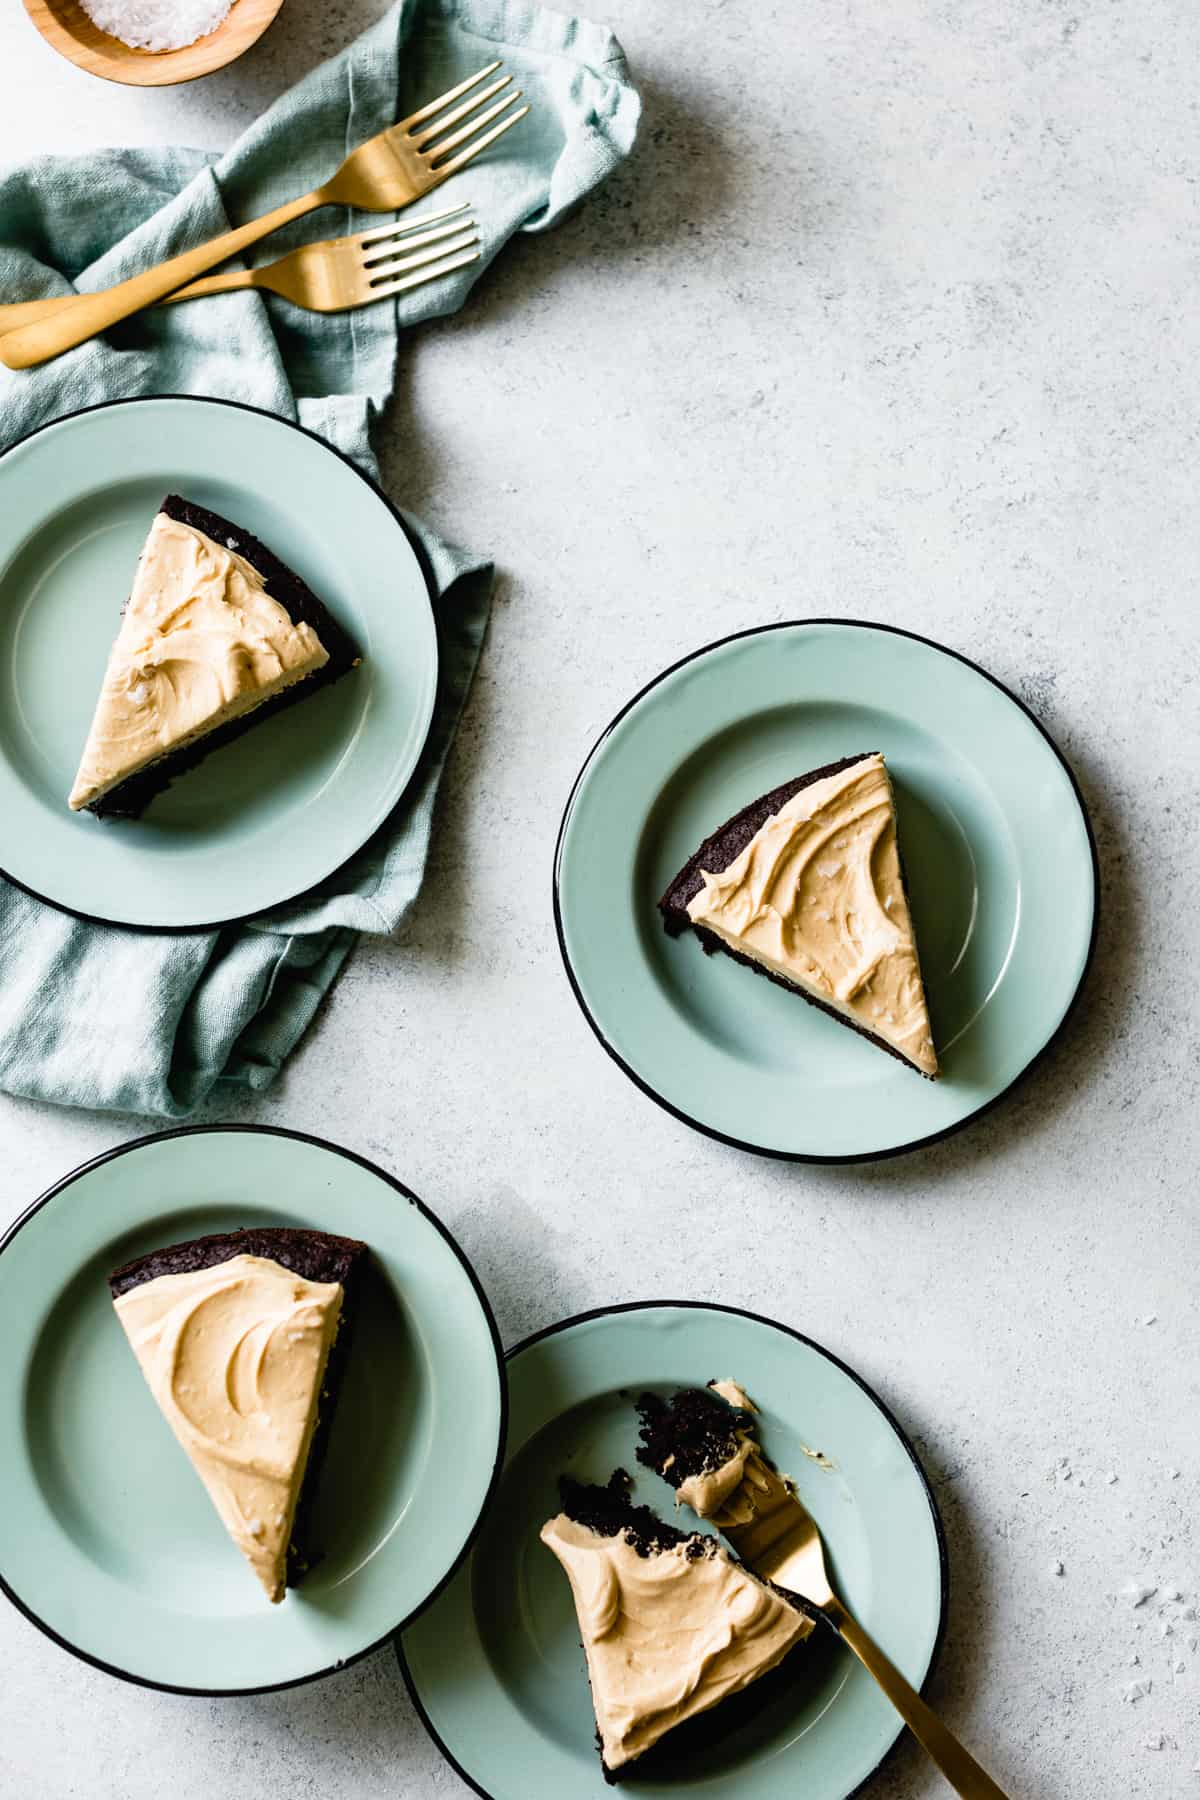 4 slices of One-Bowl Teff Chocolate Cake with Peanut Butter Frosting {gluten-free}